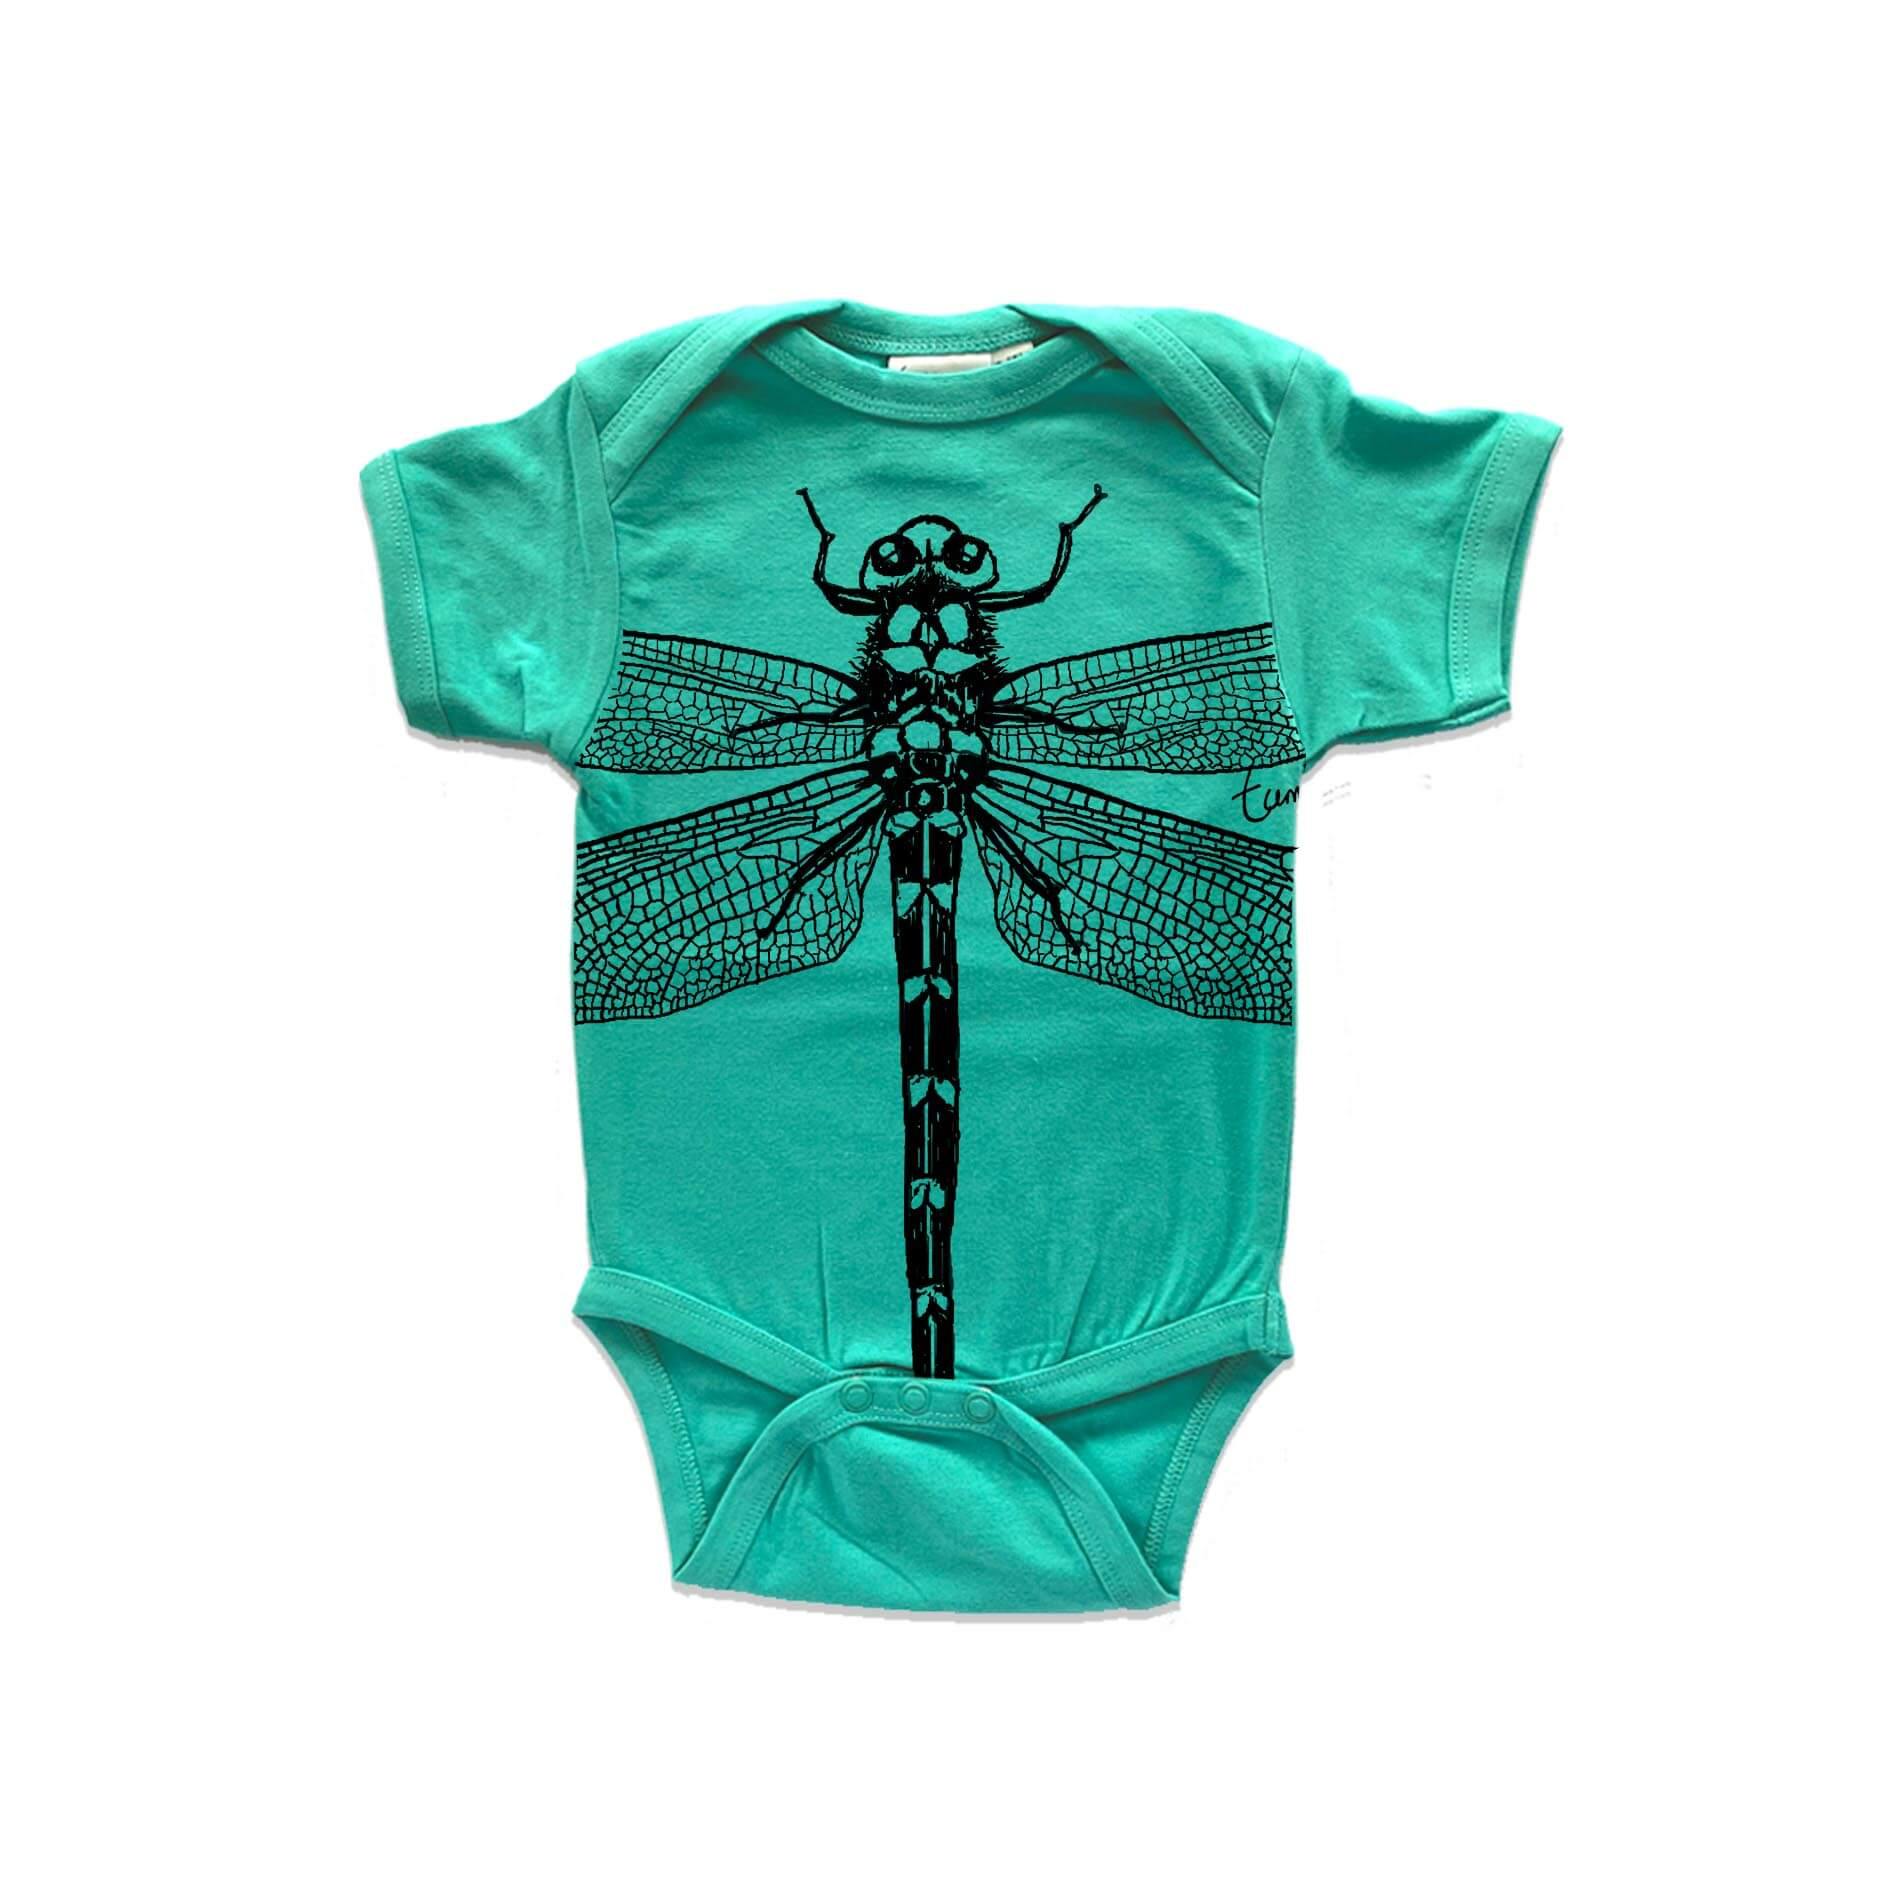 Short sleeved, marine, organic cotton, baby onesie featuring a screen printed Dragonfly design.
 design.